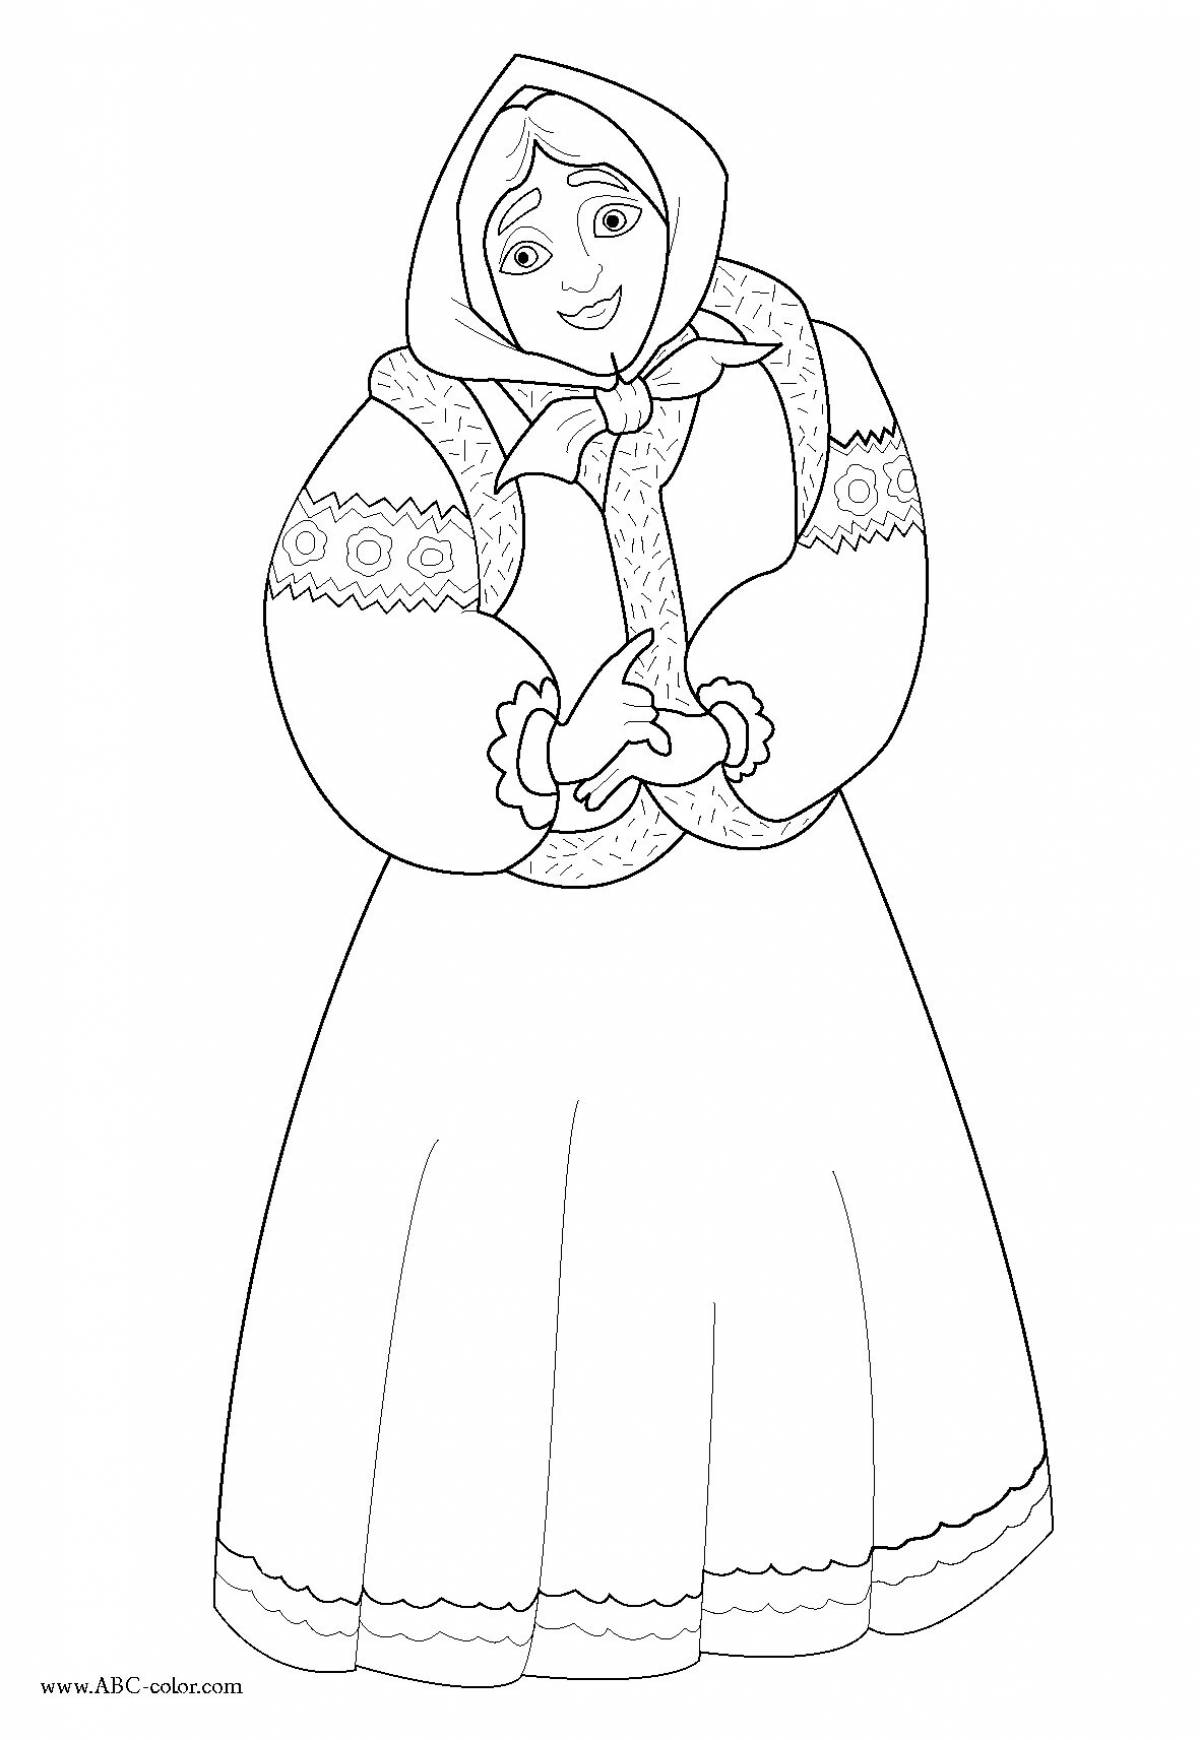 Old woman winter #7